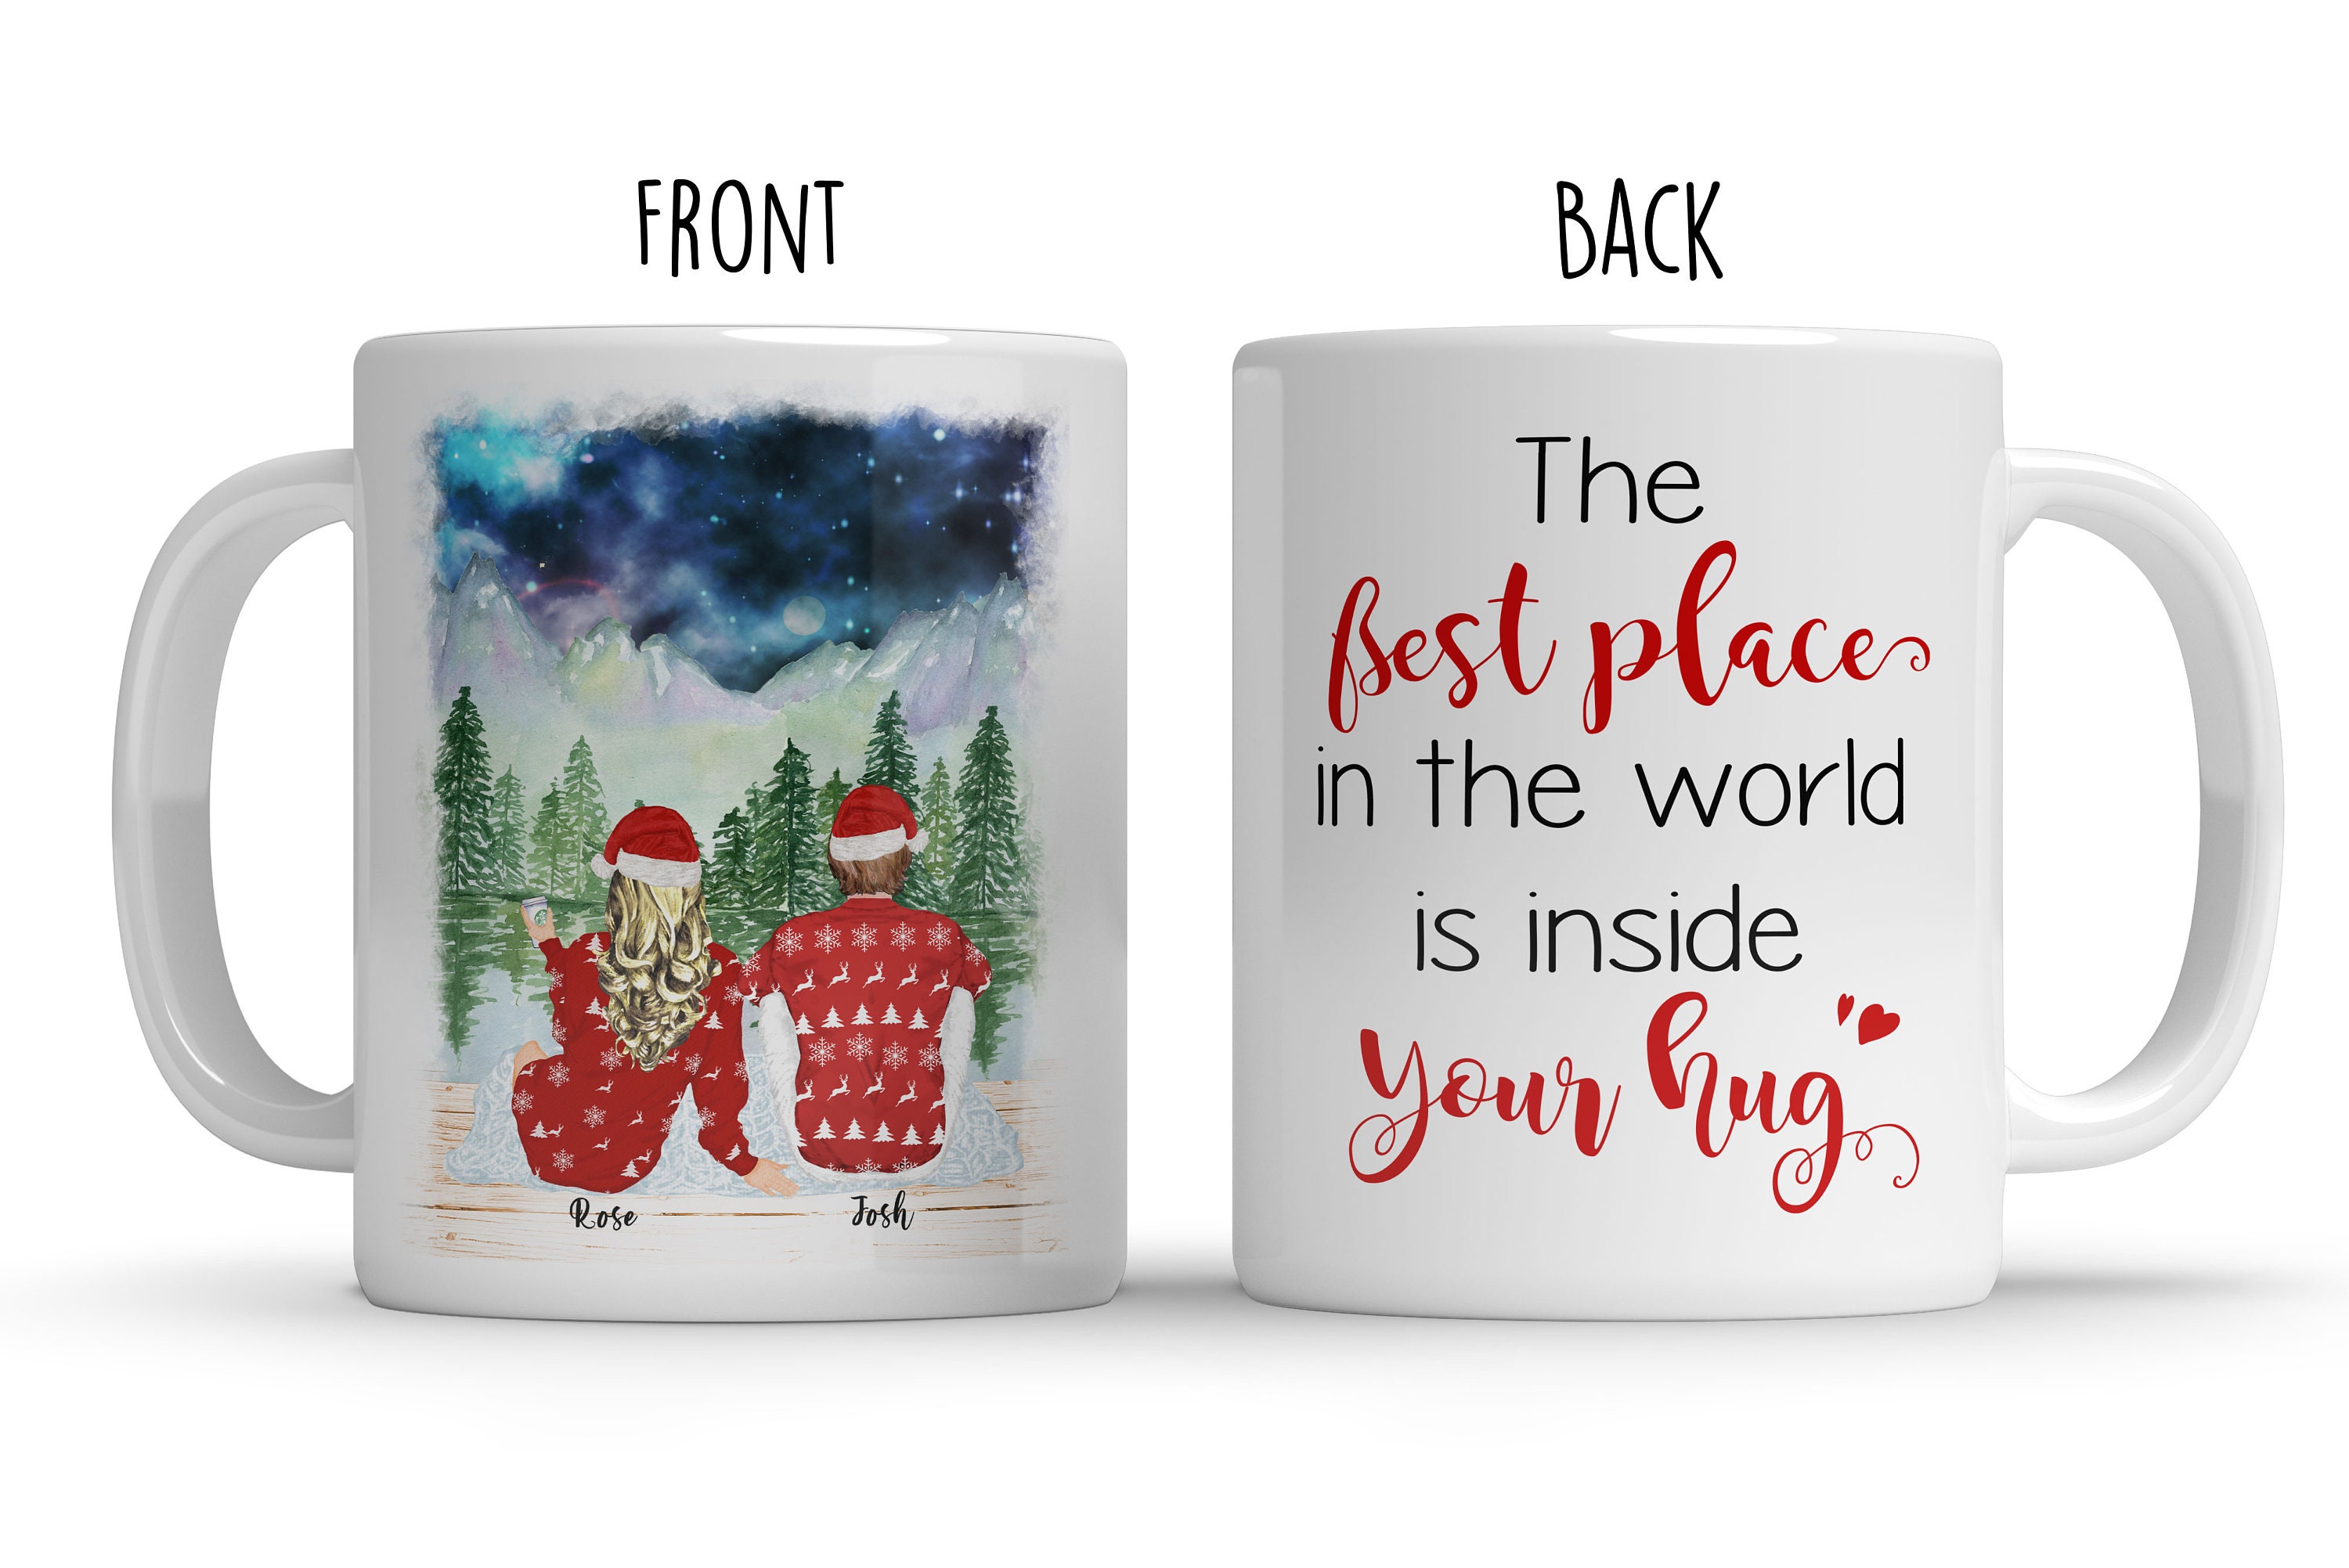 Christmas Gifts for Couples, Couples Gift, Couples Gift Christmas, Couple  Christmas Mugs, Boyfriend Christmas Gift Ideas, Custom Couple Gift 